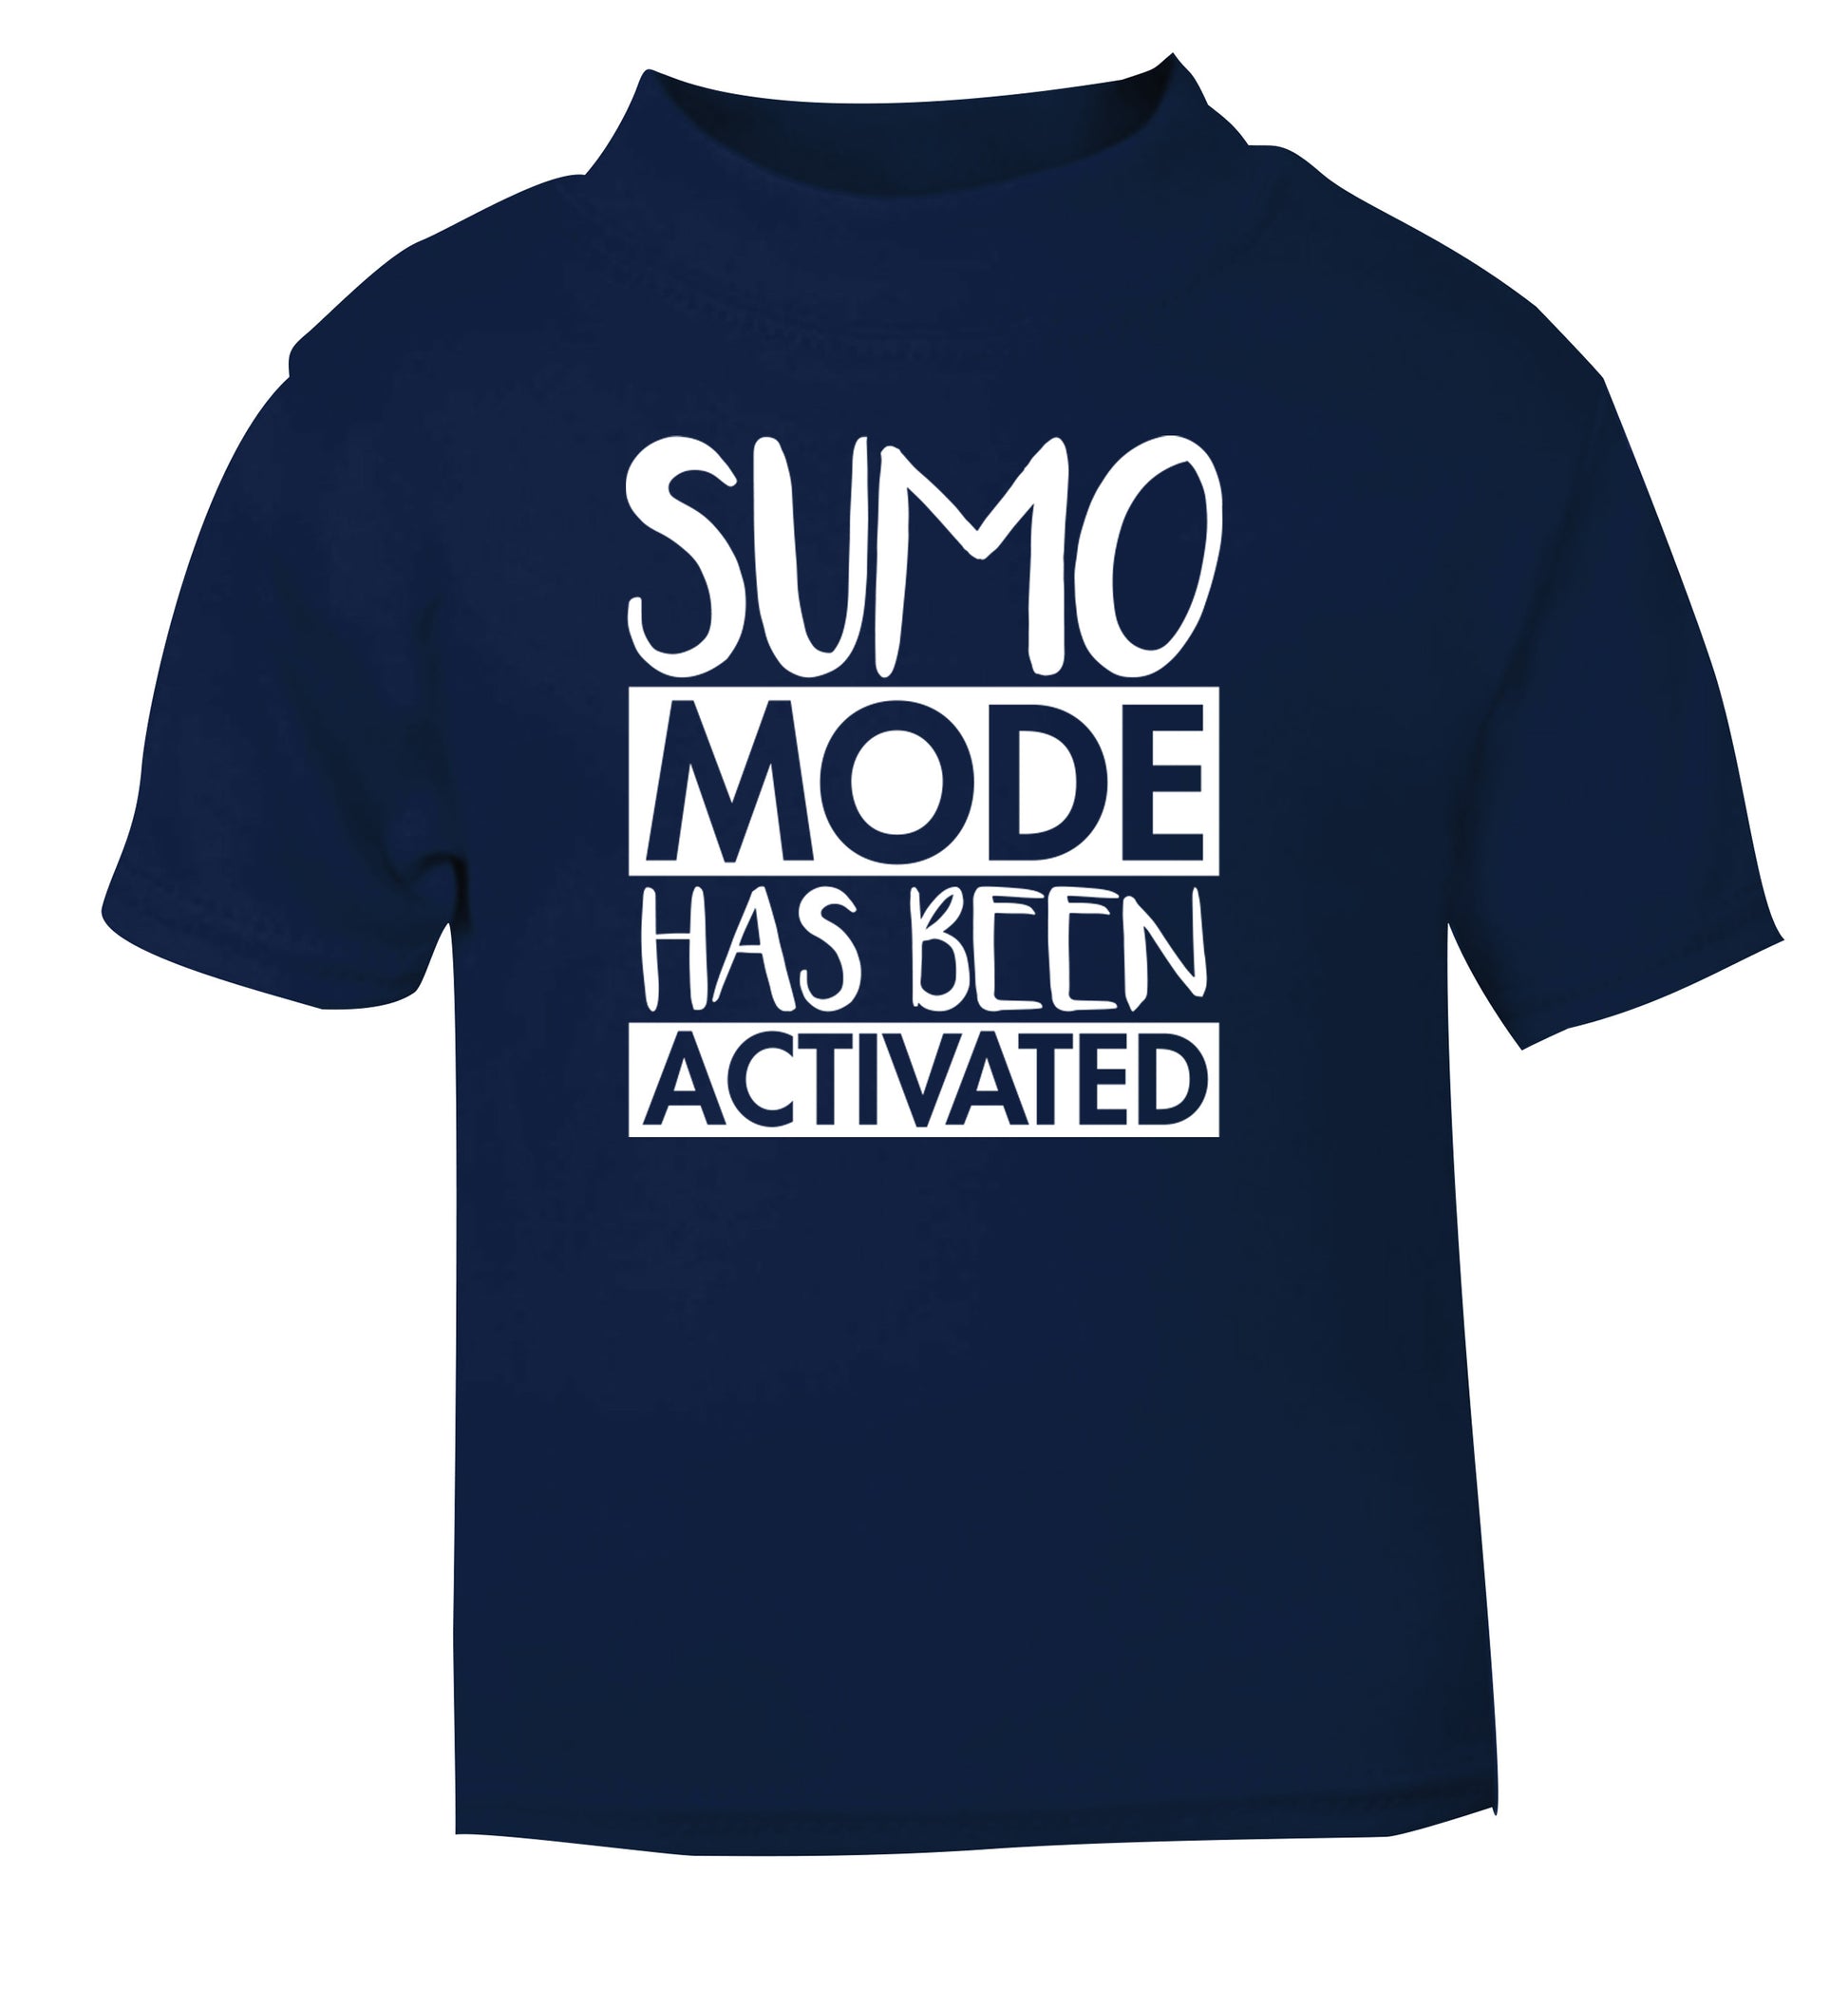 Sumo mode activated navy Baby Toddler Tshirt 2 Years